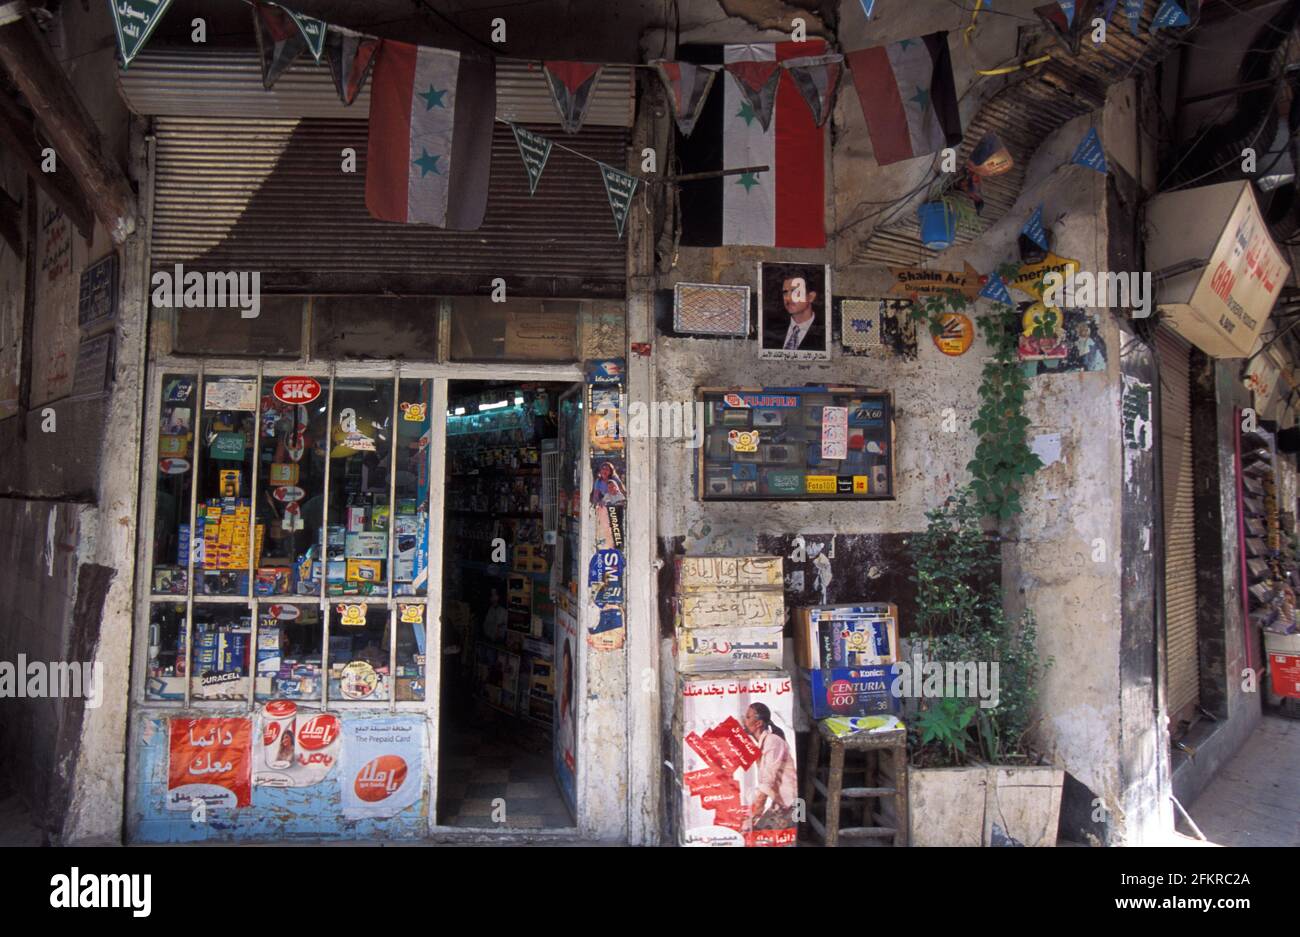 Front shop with Syrian flag hanging and president poster in Al-Hamidiyah Souq, Damascus, Syria Stock Photo